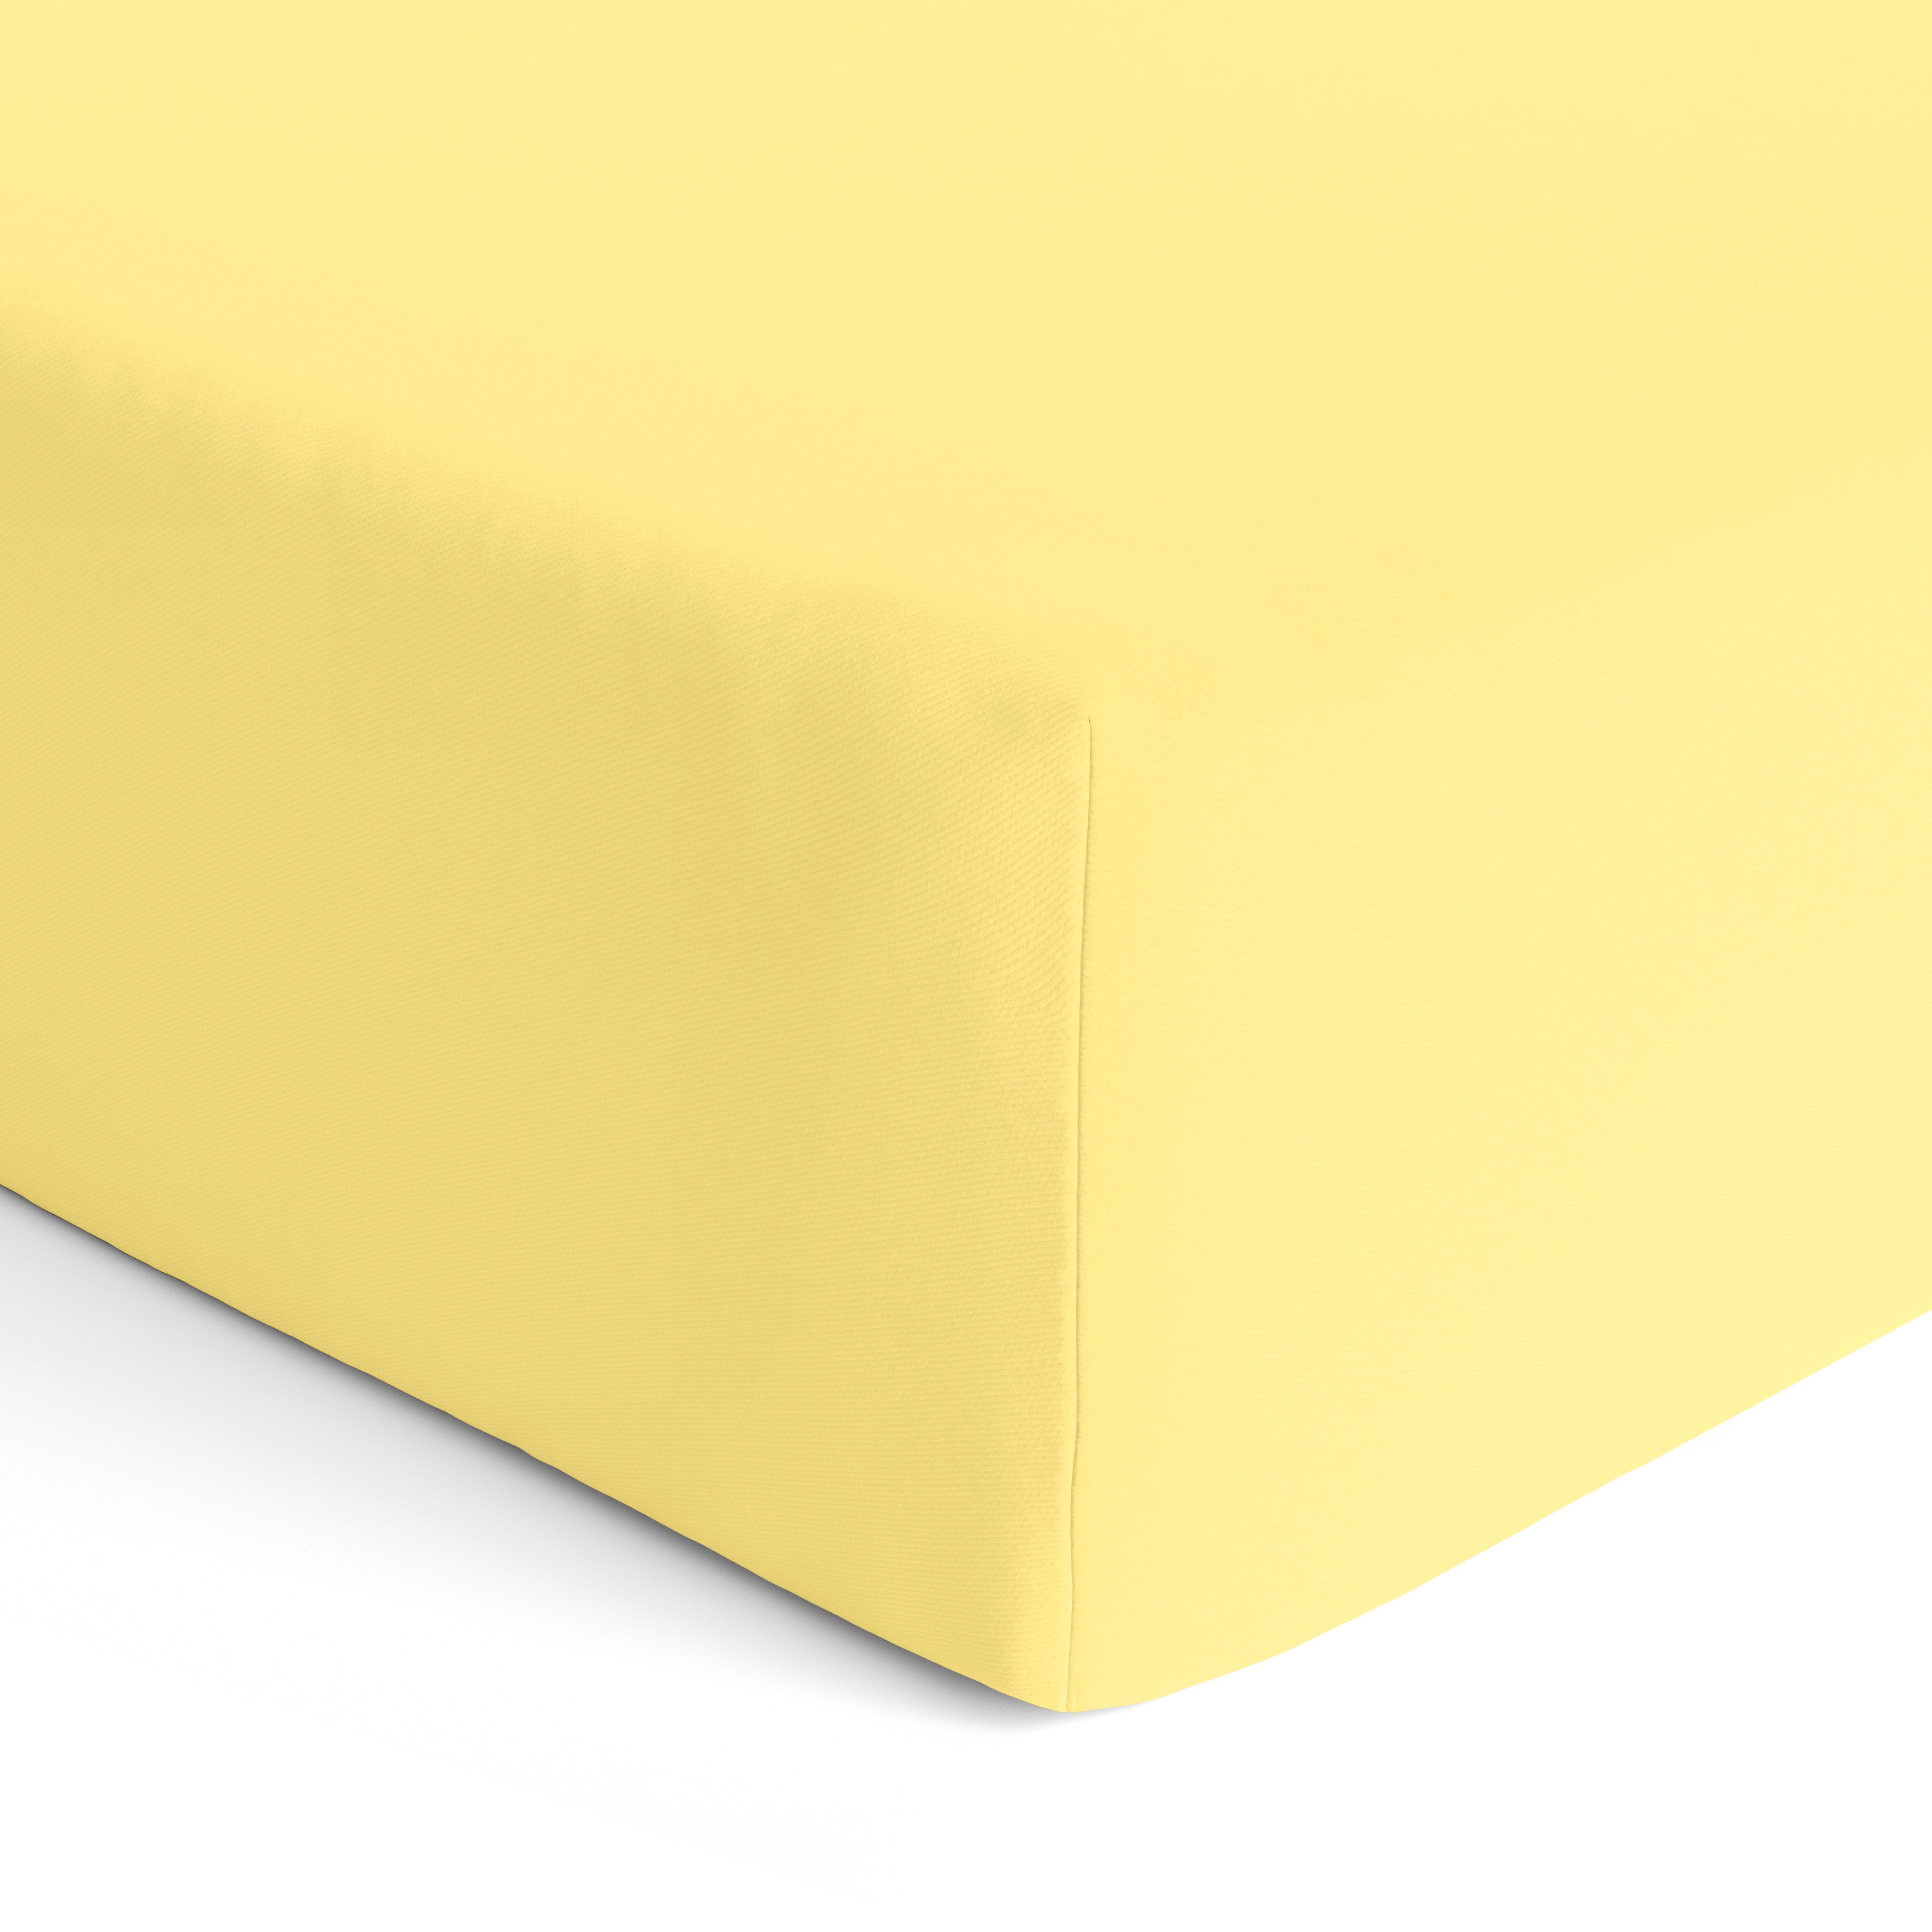 The White Cradle Pure Organic Cotton Elastic Fitted Crib Sheet for Baby Cot 28 x 52 inch - Super Soft, Smooth, Absorbent, Twill Fabric for Infants, Newborns, Babies, Toddlers - Yellow